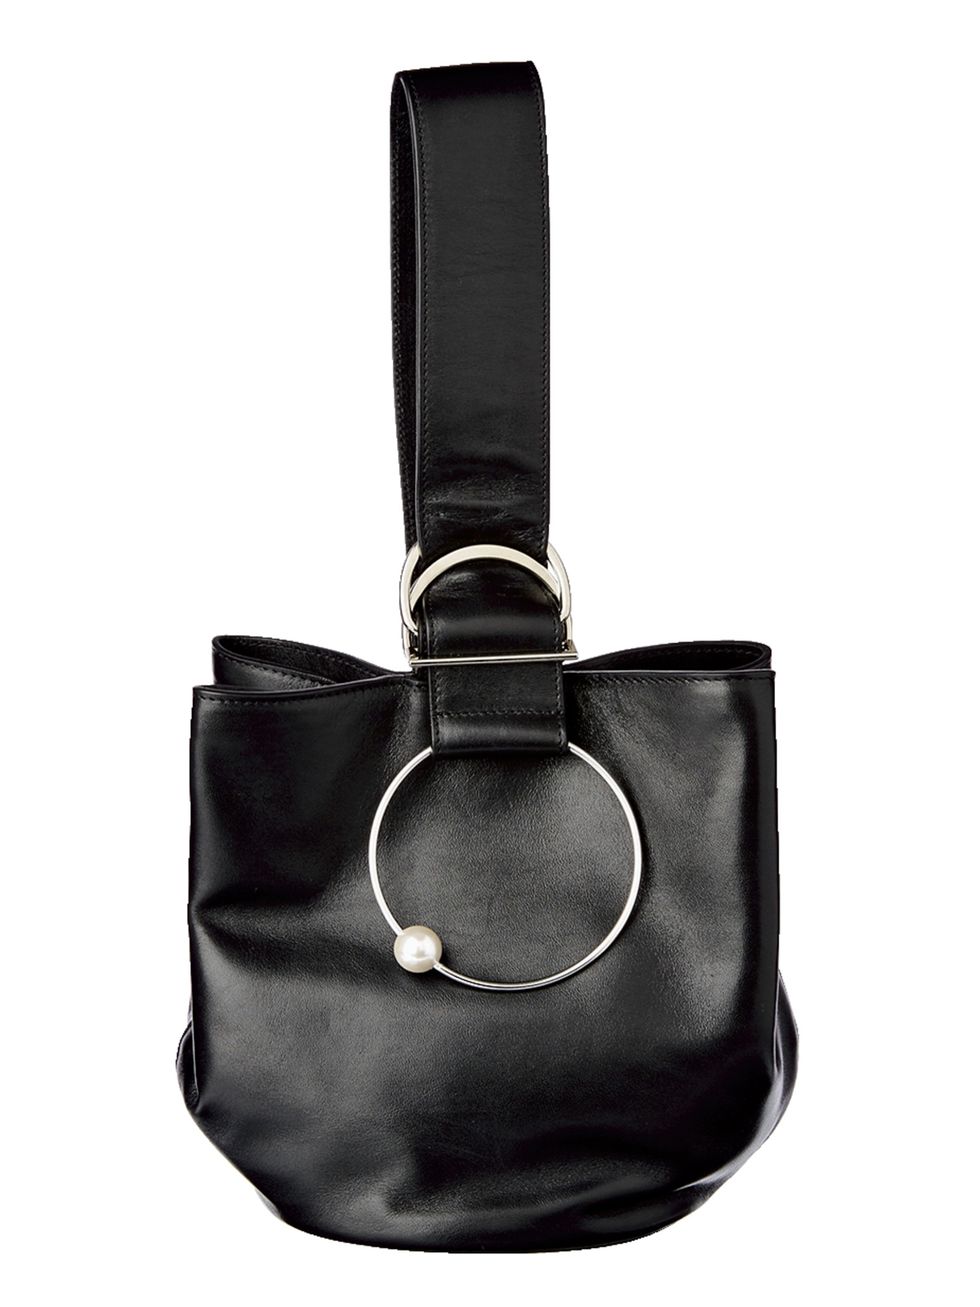 Product, Style, Bag, Black, Leather, Shoulder bag, Cosmetics, Material property, Strap, Silver, 